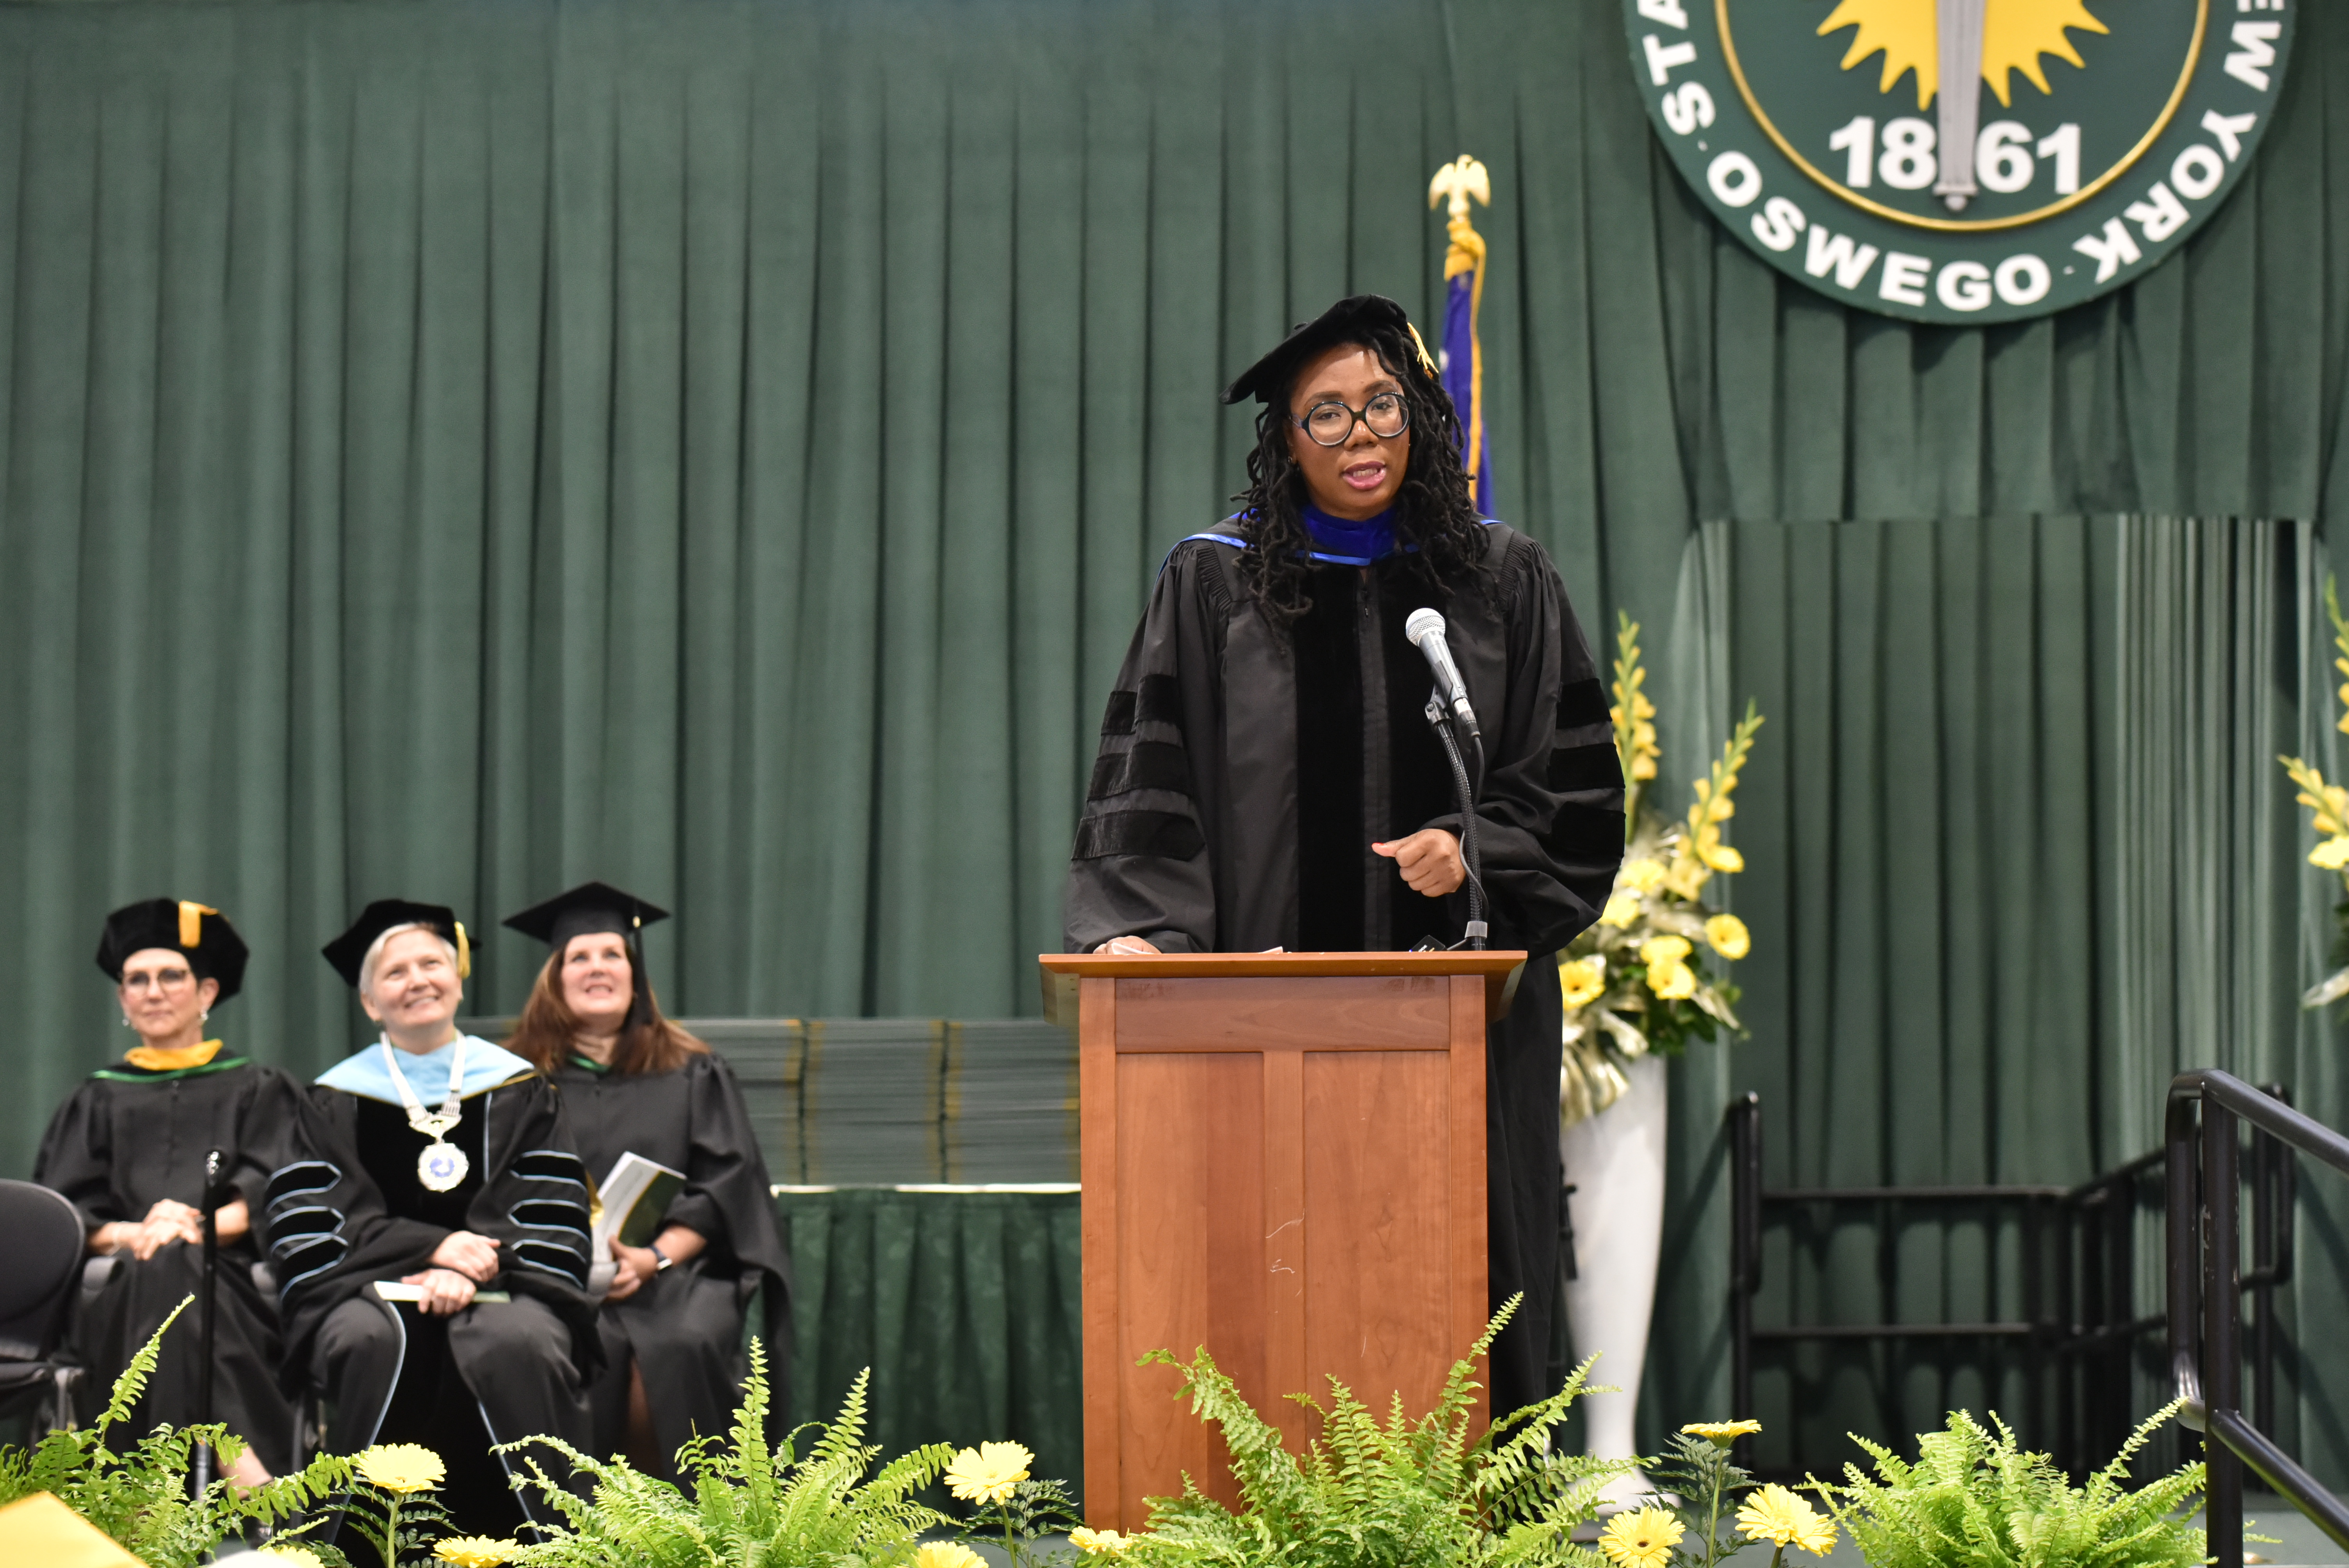 Dr. Juhanna Rogers, senior vice president of racial equity and social impact for CenterStateCEO, served as commencement speaker at the 9 a.m. ceremony for the College of Liberal Arts and Sciences. 